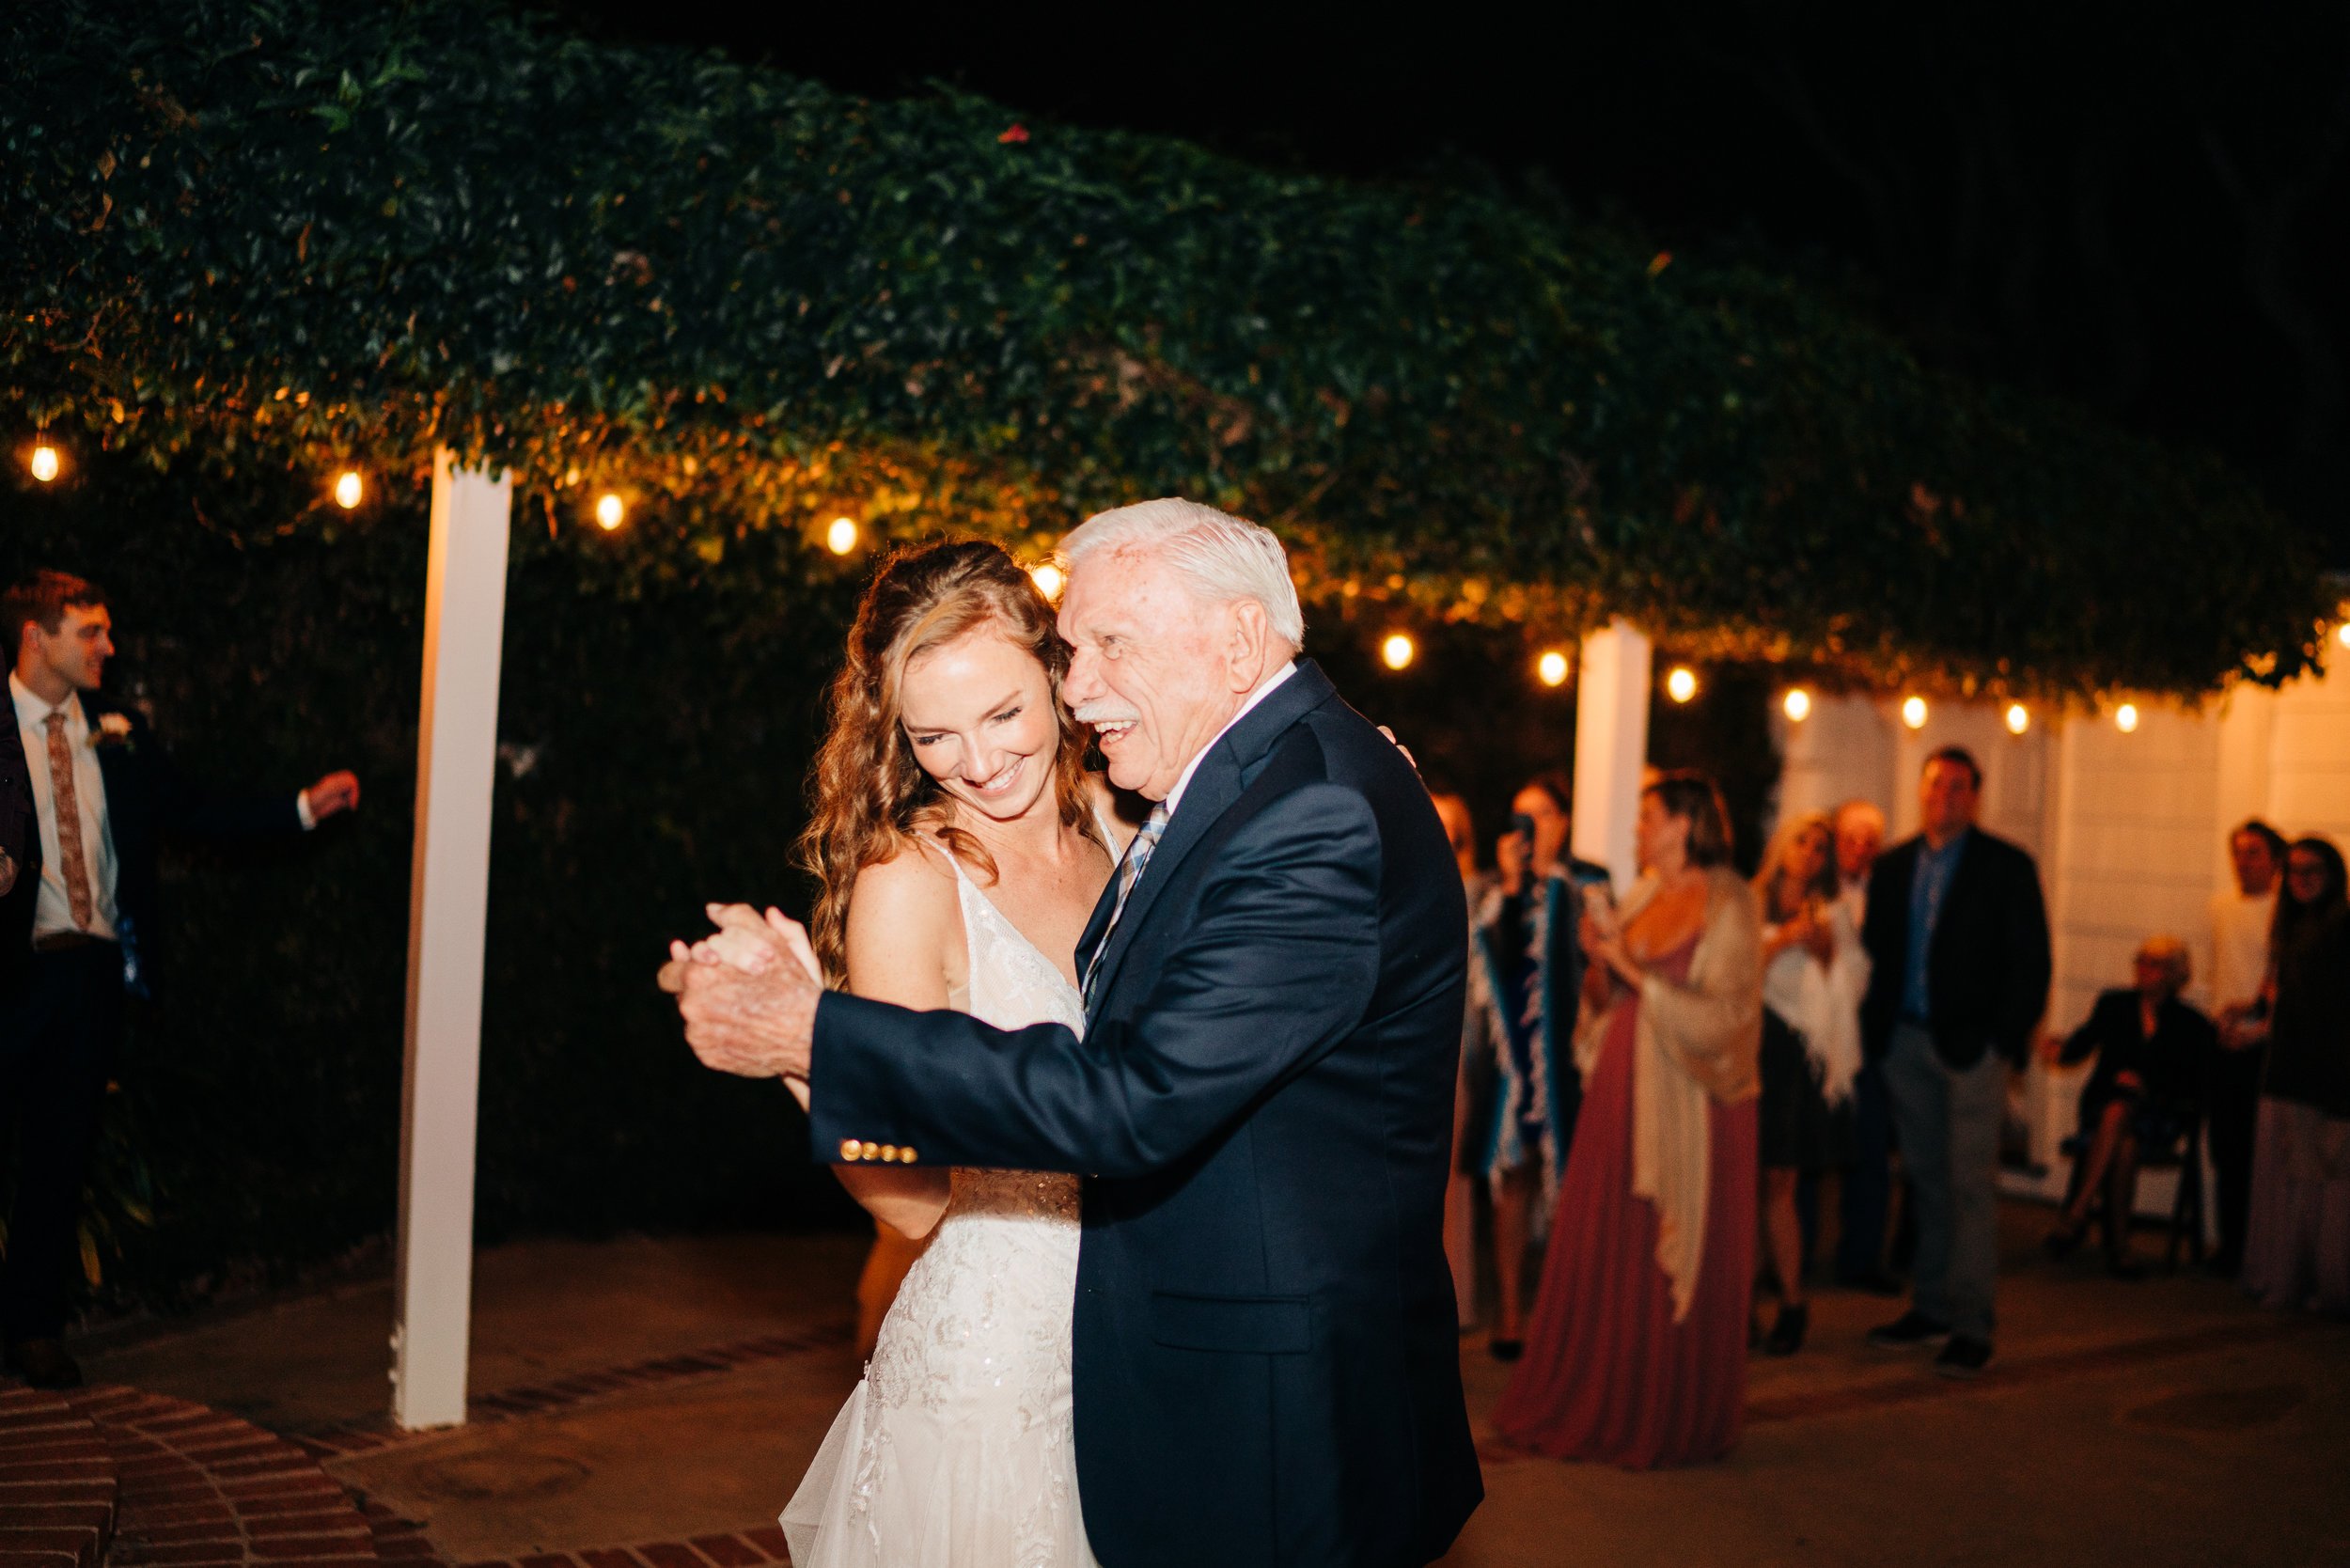 www.santabarbarawedding.com | Brandon Bibbins Photography | The Cottages at Polo Run | Father of the Bride Dance